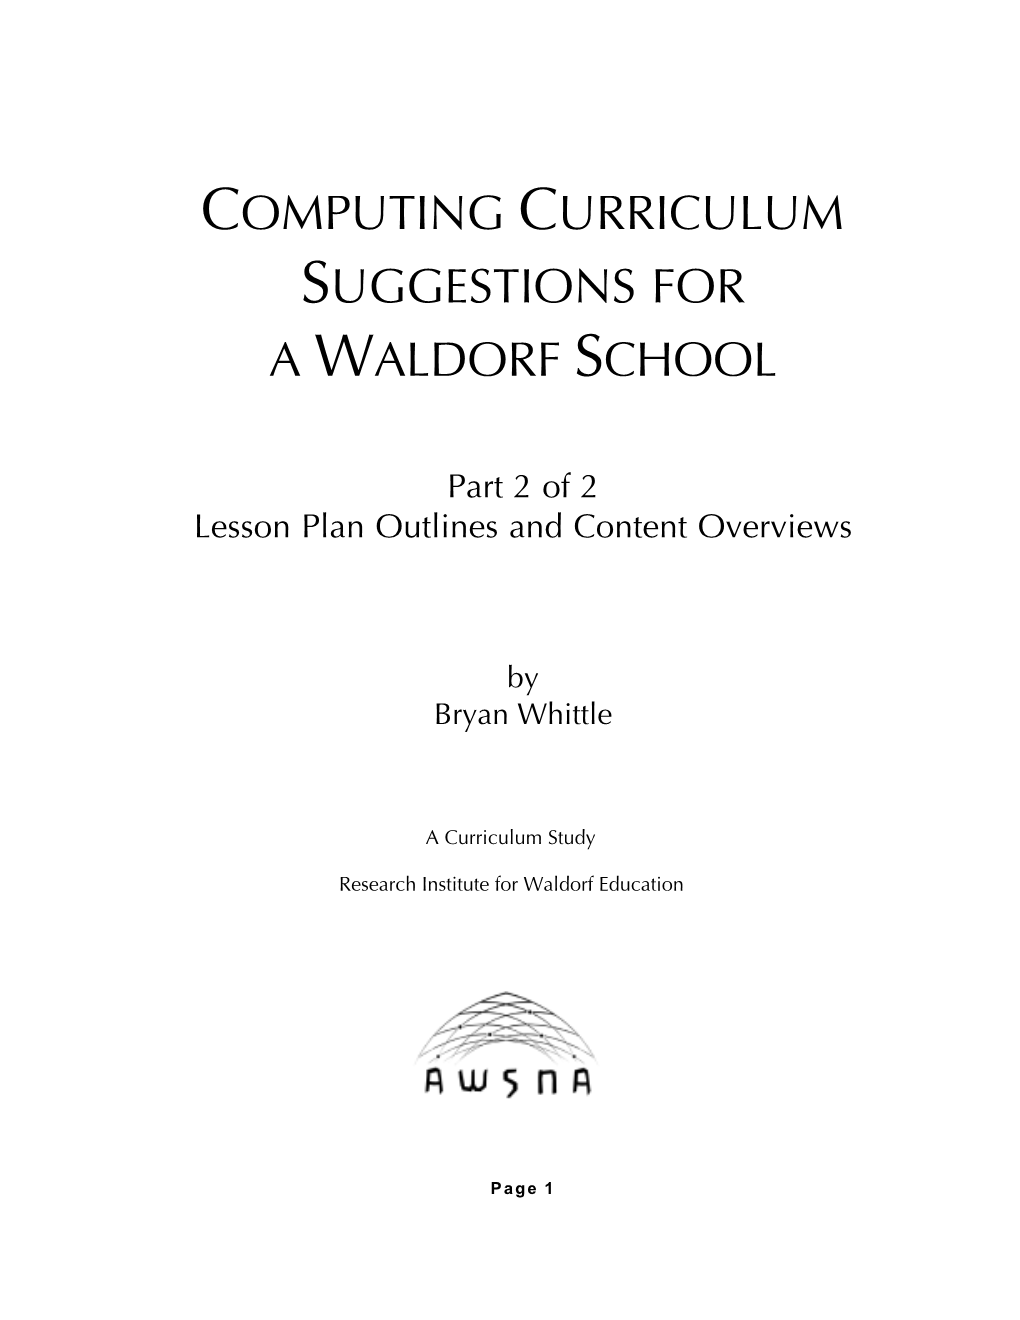 Computing Curriculum Suggestions for a Waldorf School, Part 2